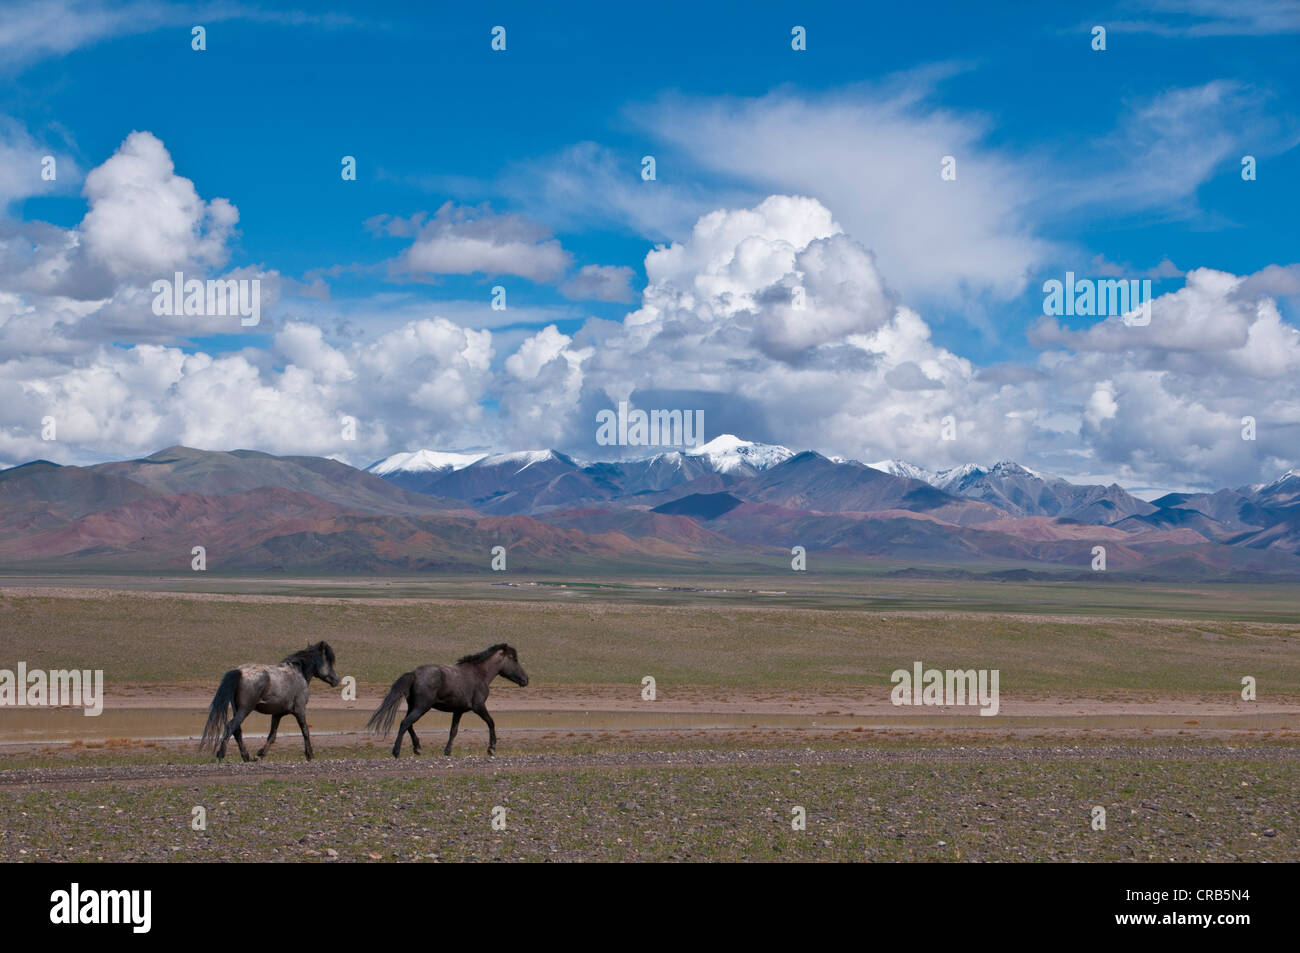 Snow-capped mountains and wild horses along the road between Ali and Gerze, West Tibet, Tibet, Asia Stock Photo